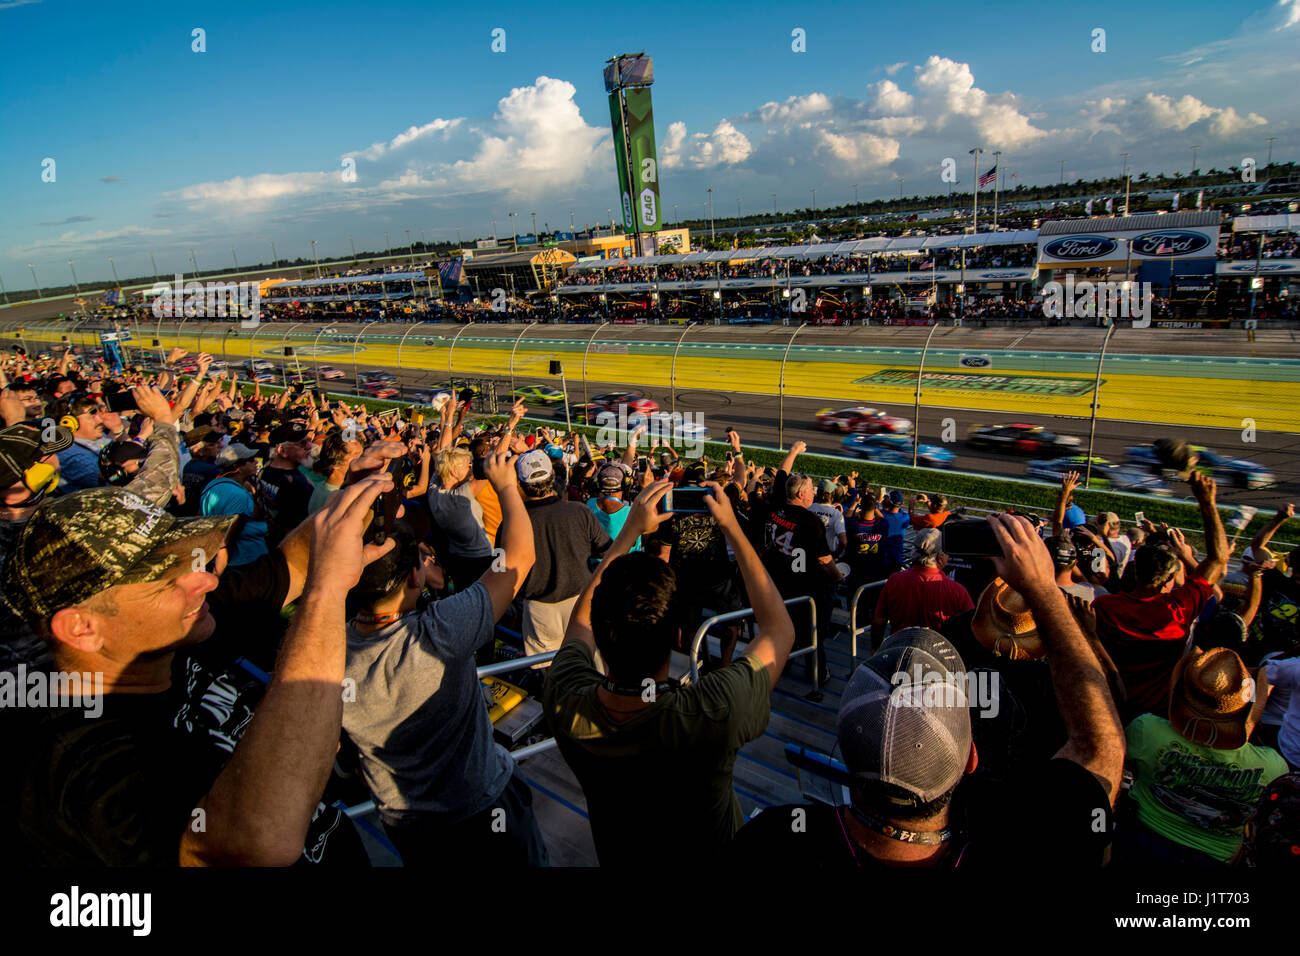 NASCAR race at Miami Homestead Speedway fan view Stock Photo